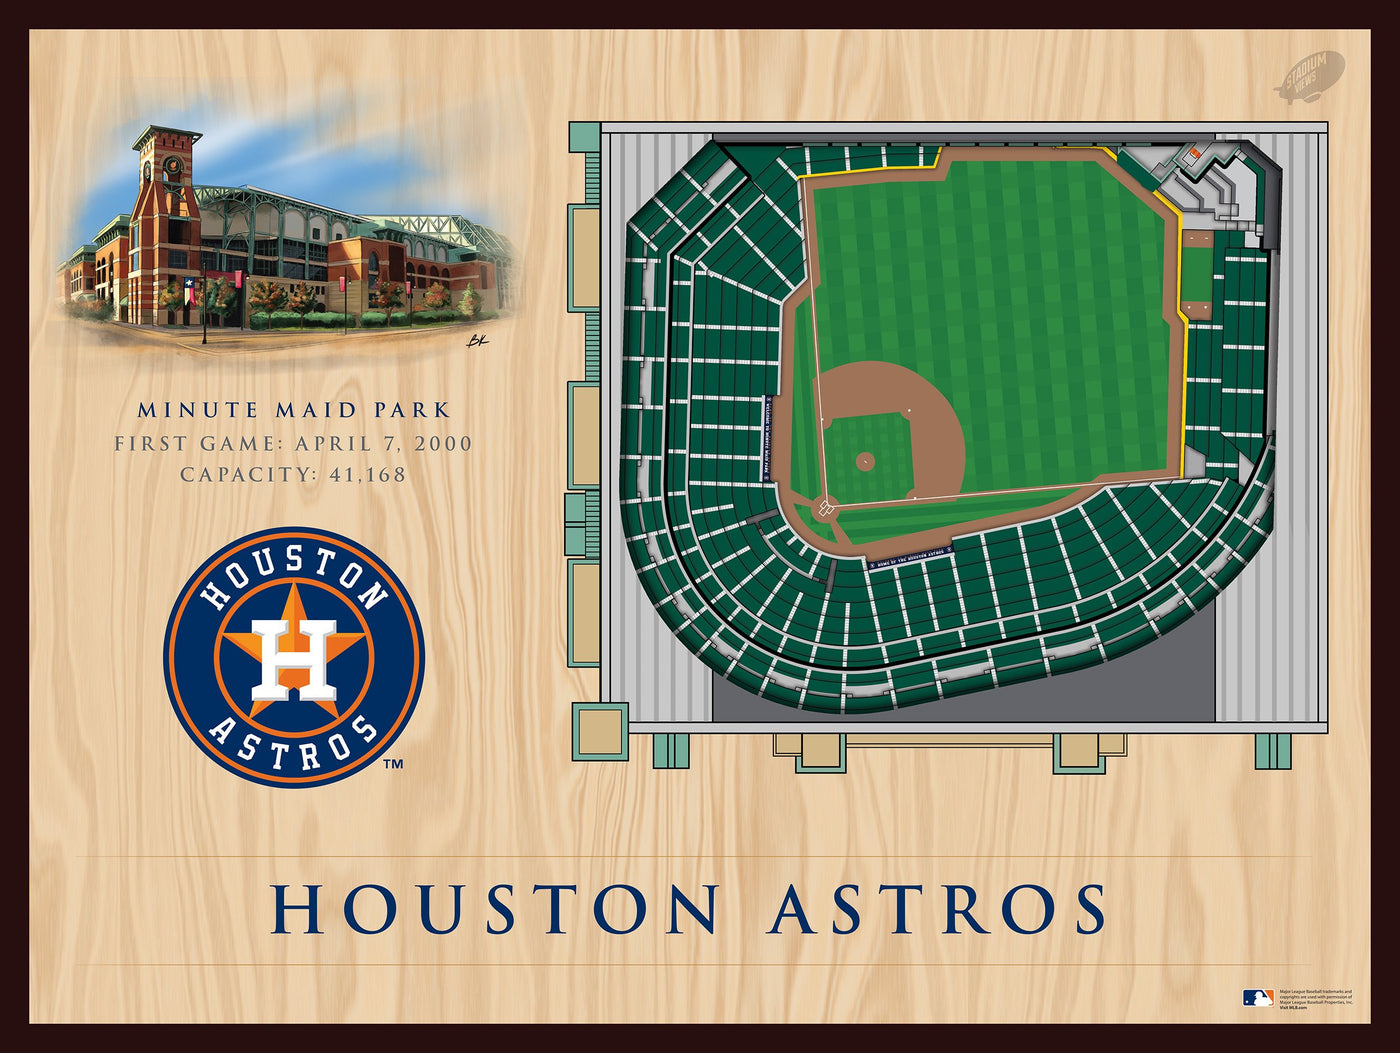 Houston Astros—Minute Maid Park 25-Layer 3D "StadiumViews" Wall Decor - Texas Time Gifts and Fine Art